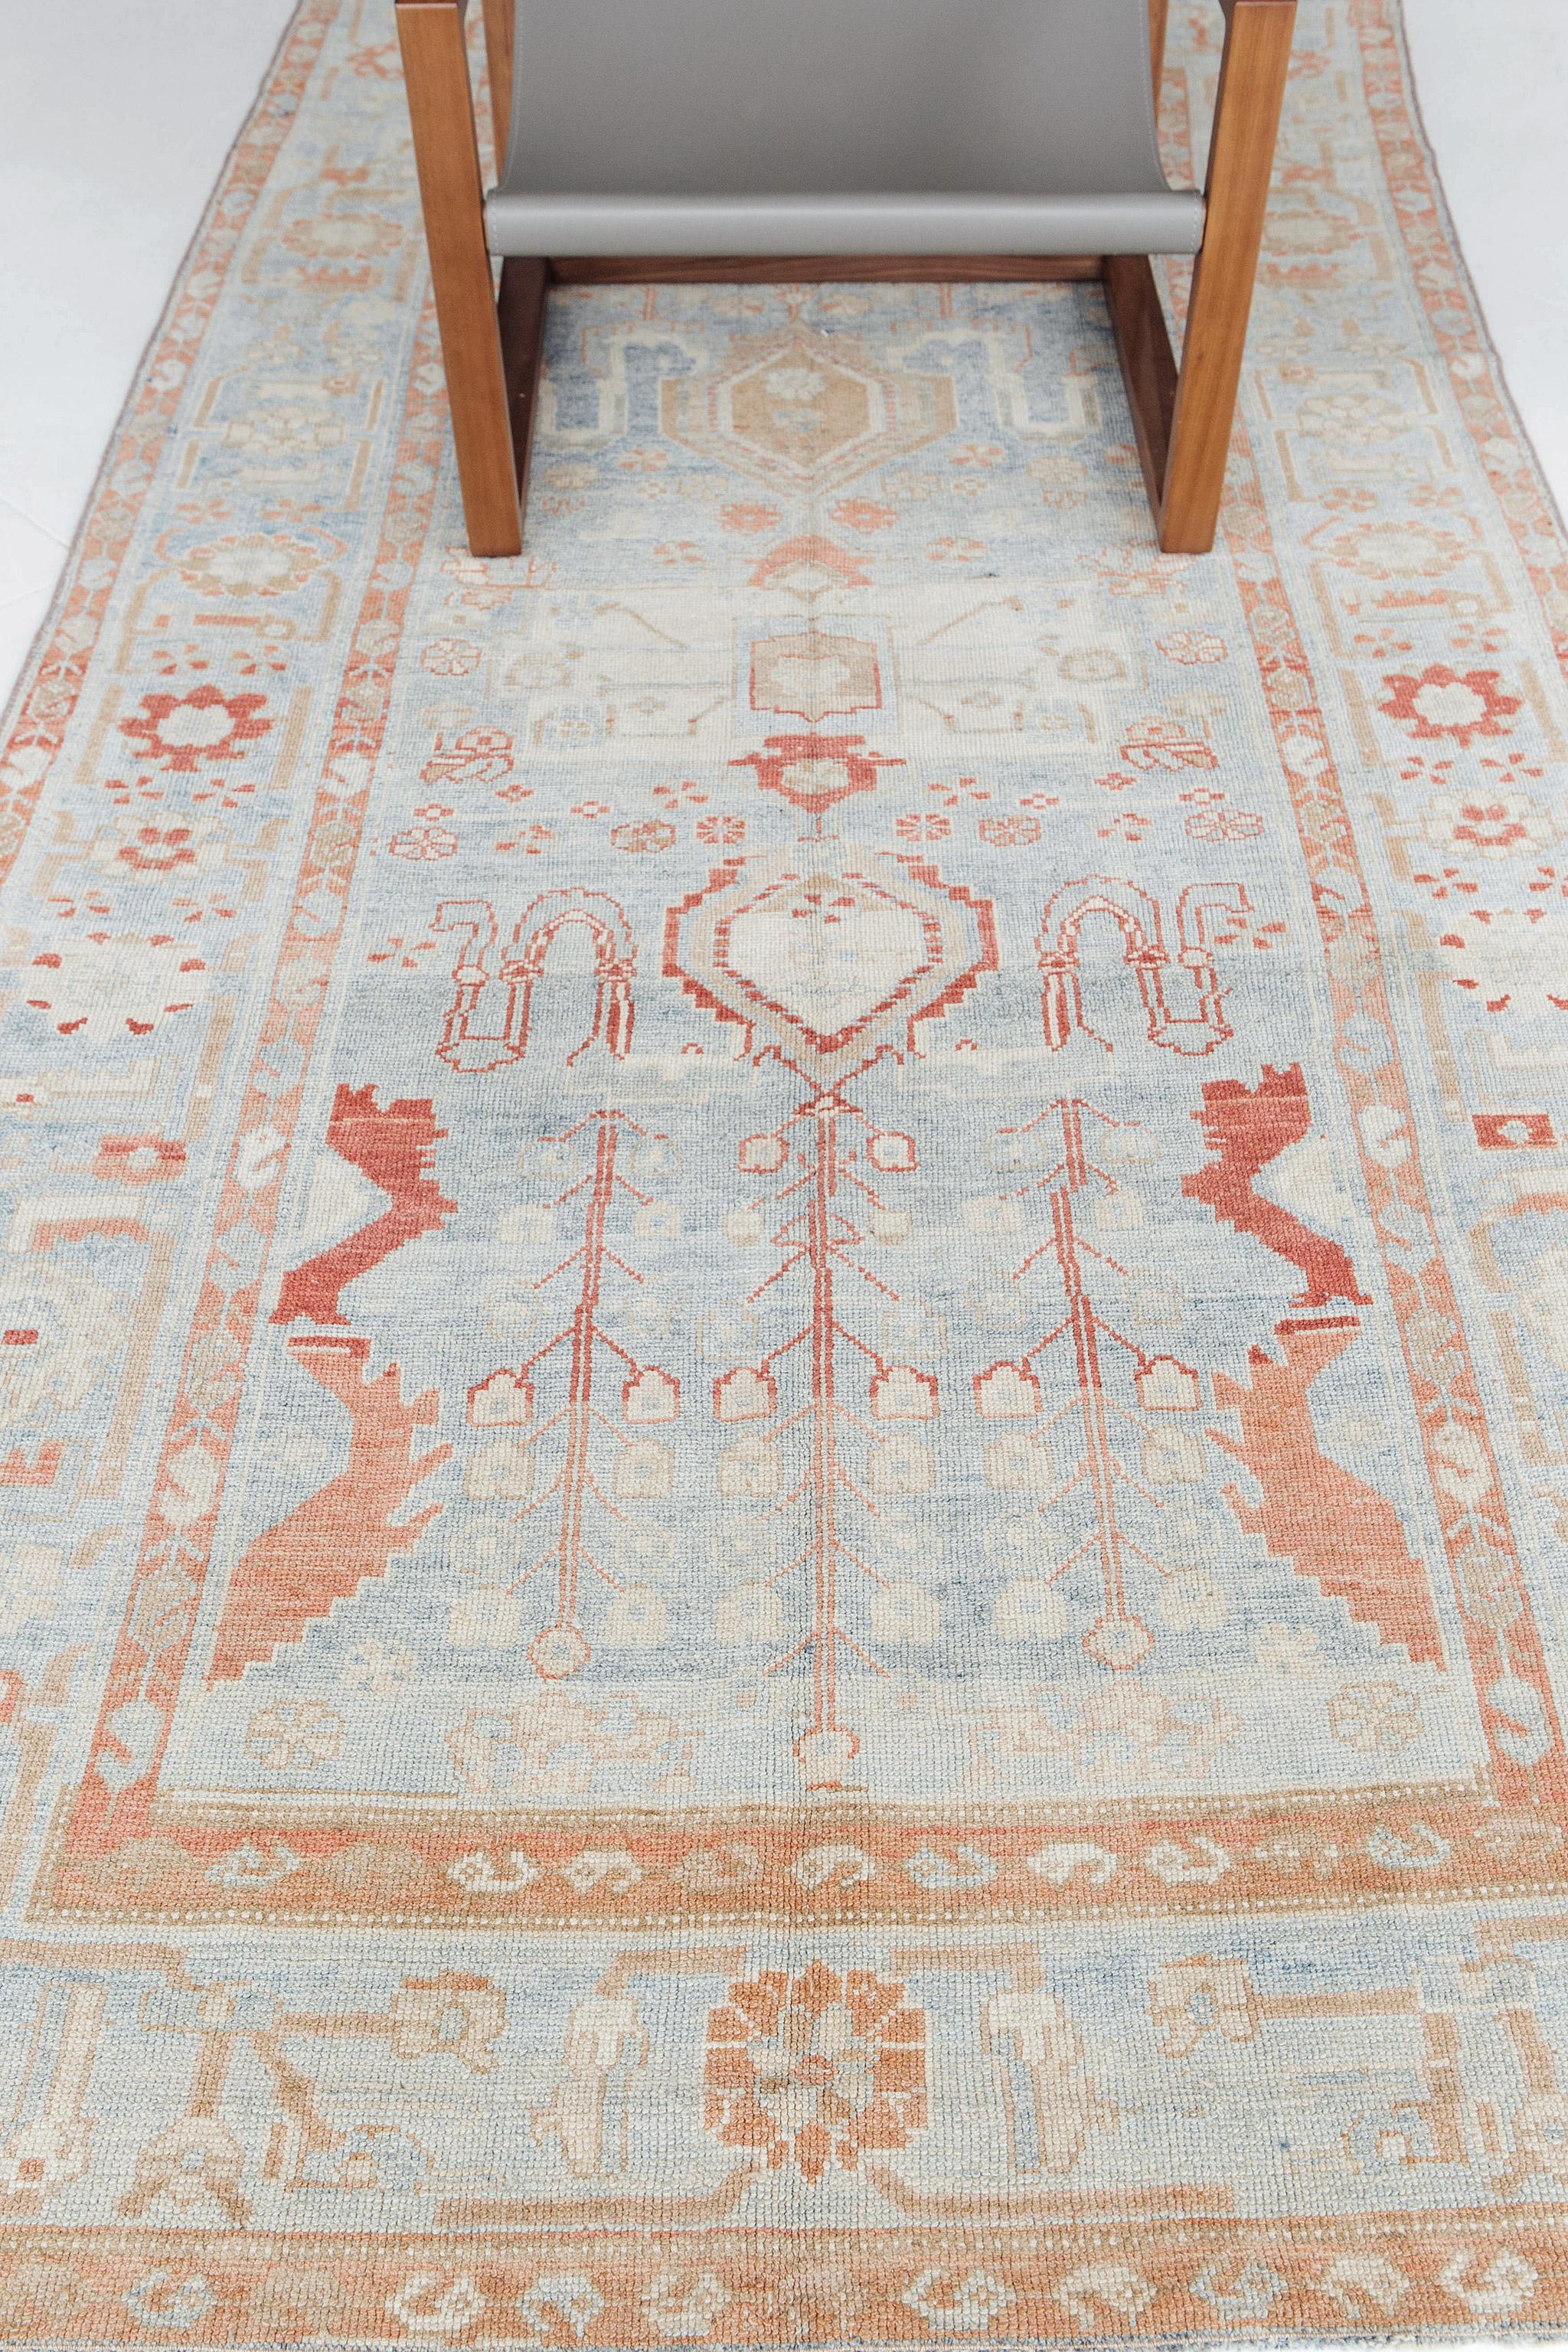 This rug features two prominent, albeit soft, colors: turquoise and red. The designs in red are gorgeous floral and vine patterns, set against the turquoise background. A nice border with more floral patterns in red adds elegance to this Persian